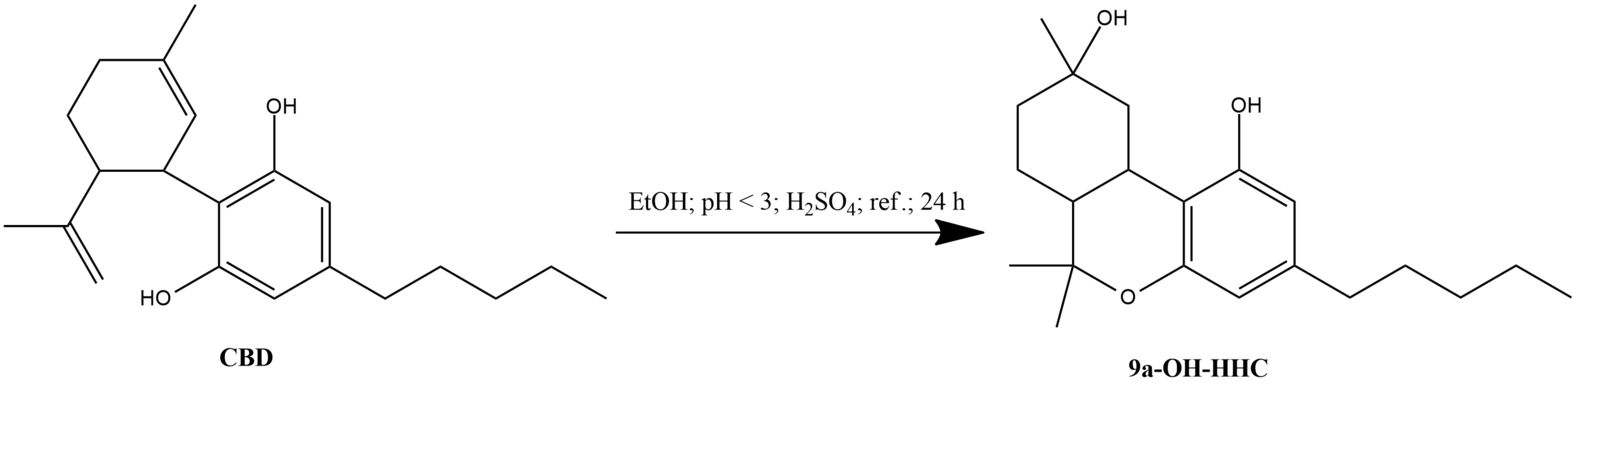 Cannabidiol isomerization With battery acid.png